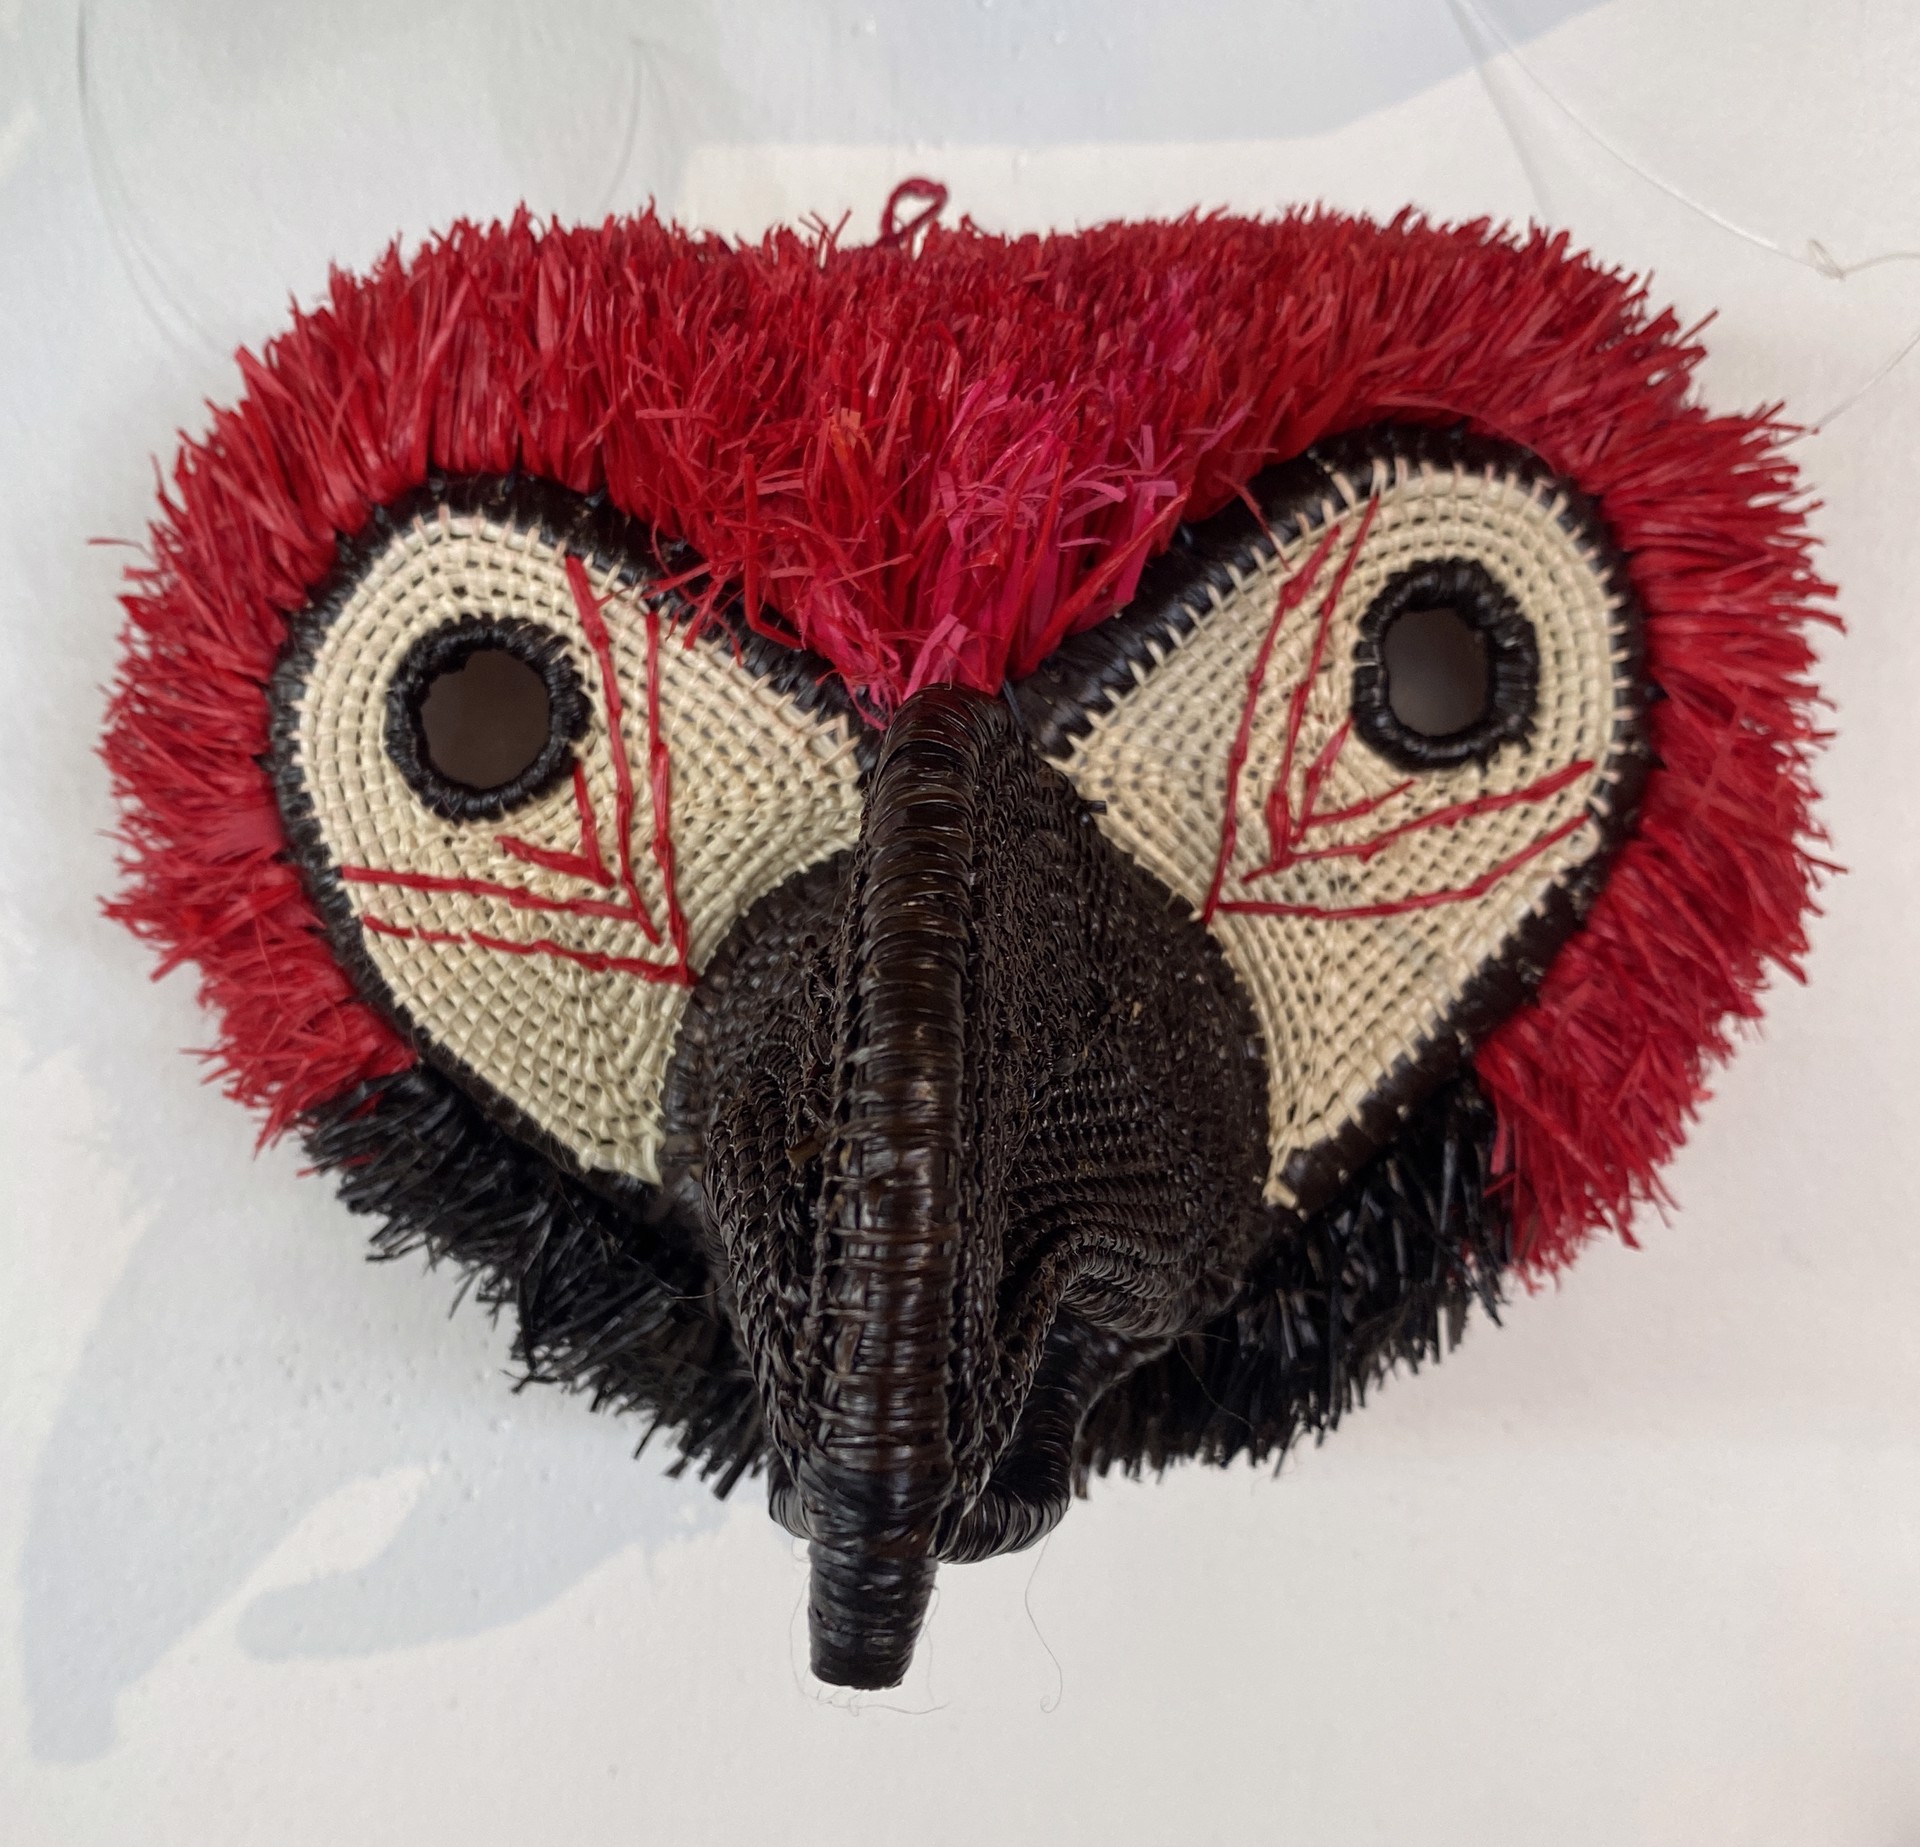 Spectacled Owl by Emberá Weavers